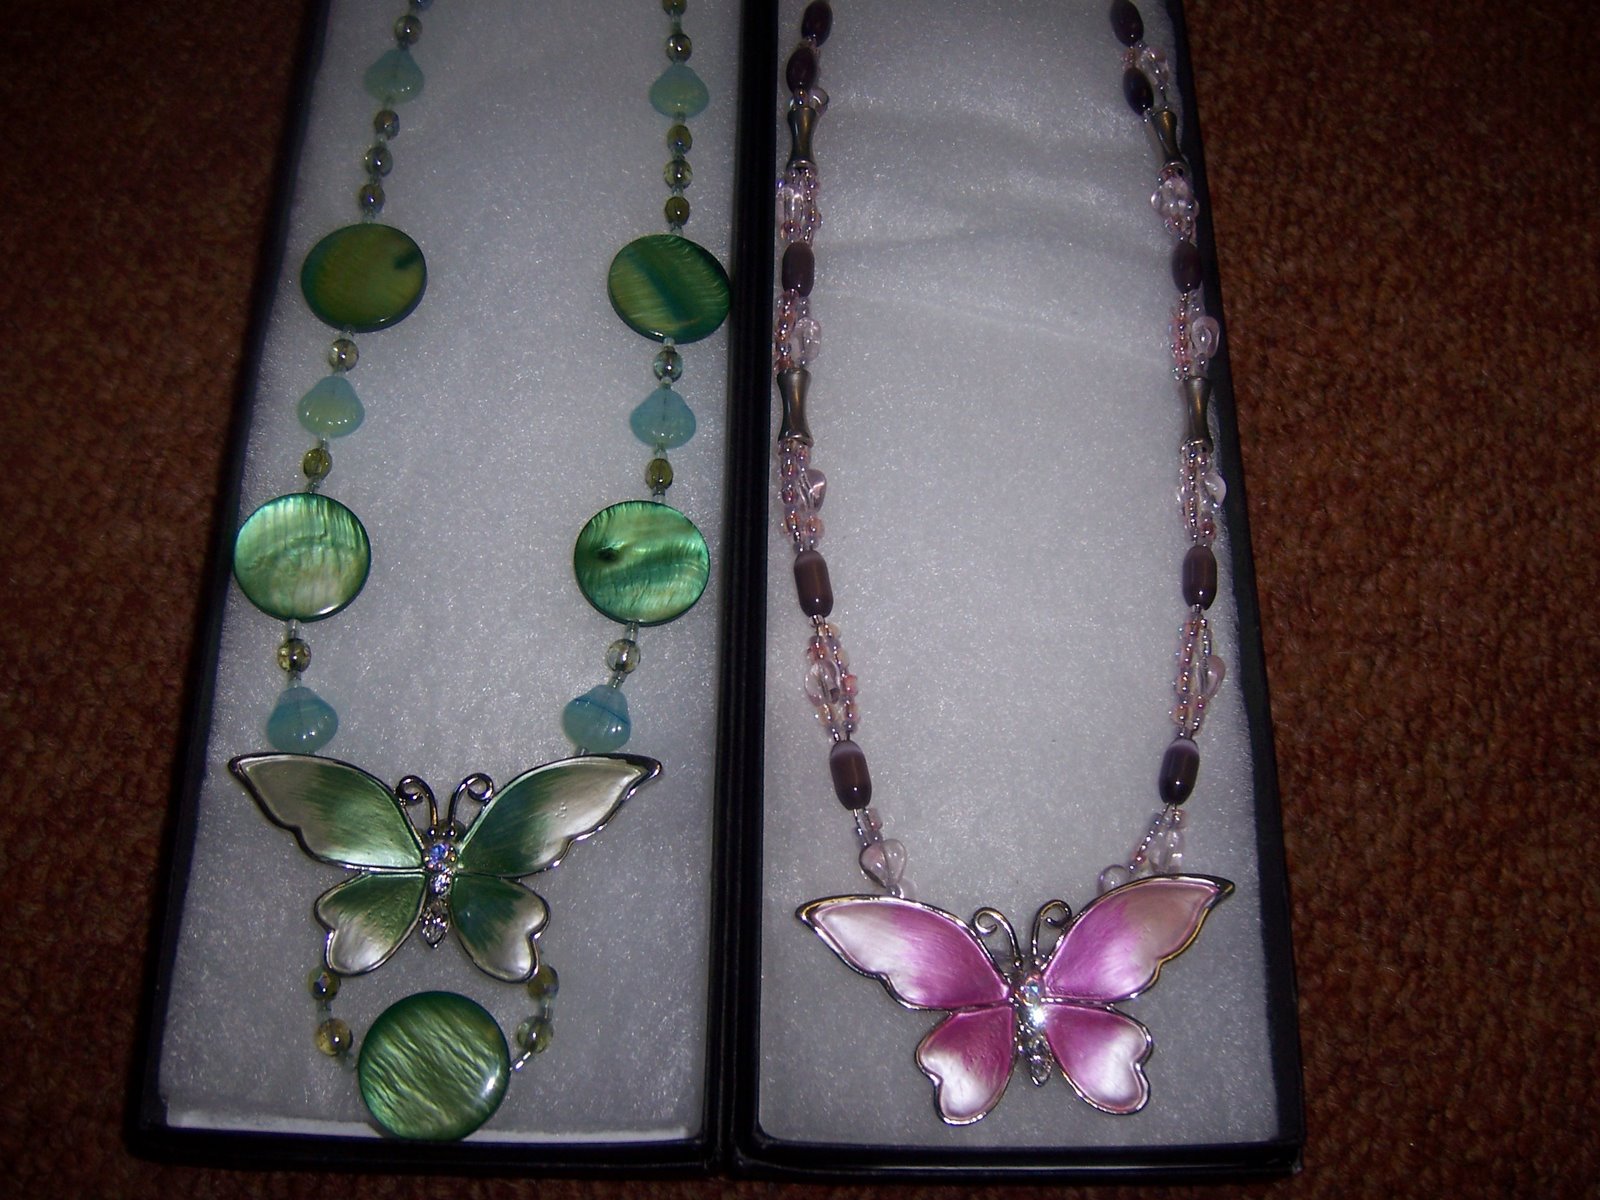 Beautiful butterfly pendant necklace with Swarovski crystals and delicate shell beads (pink/green).